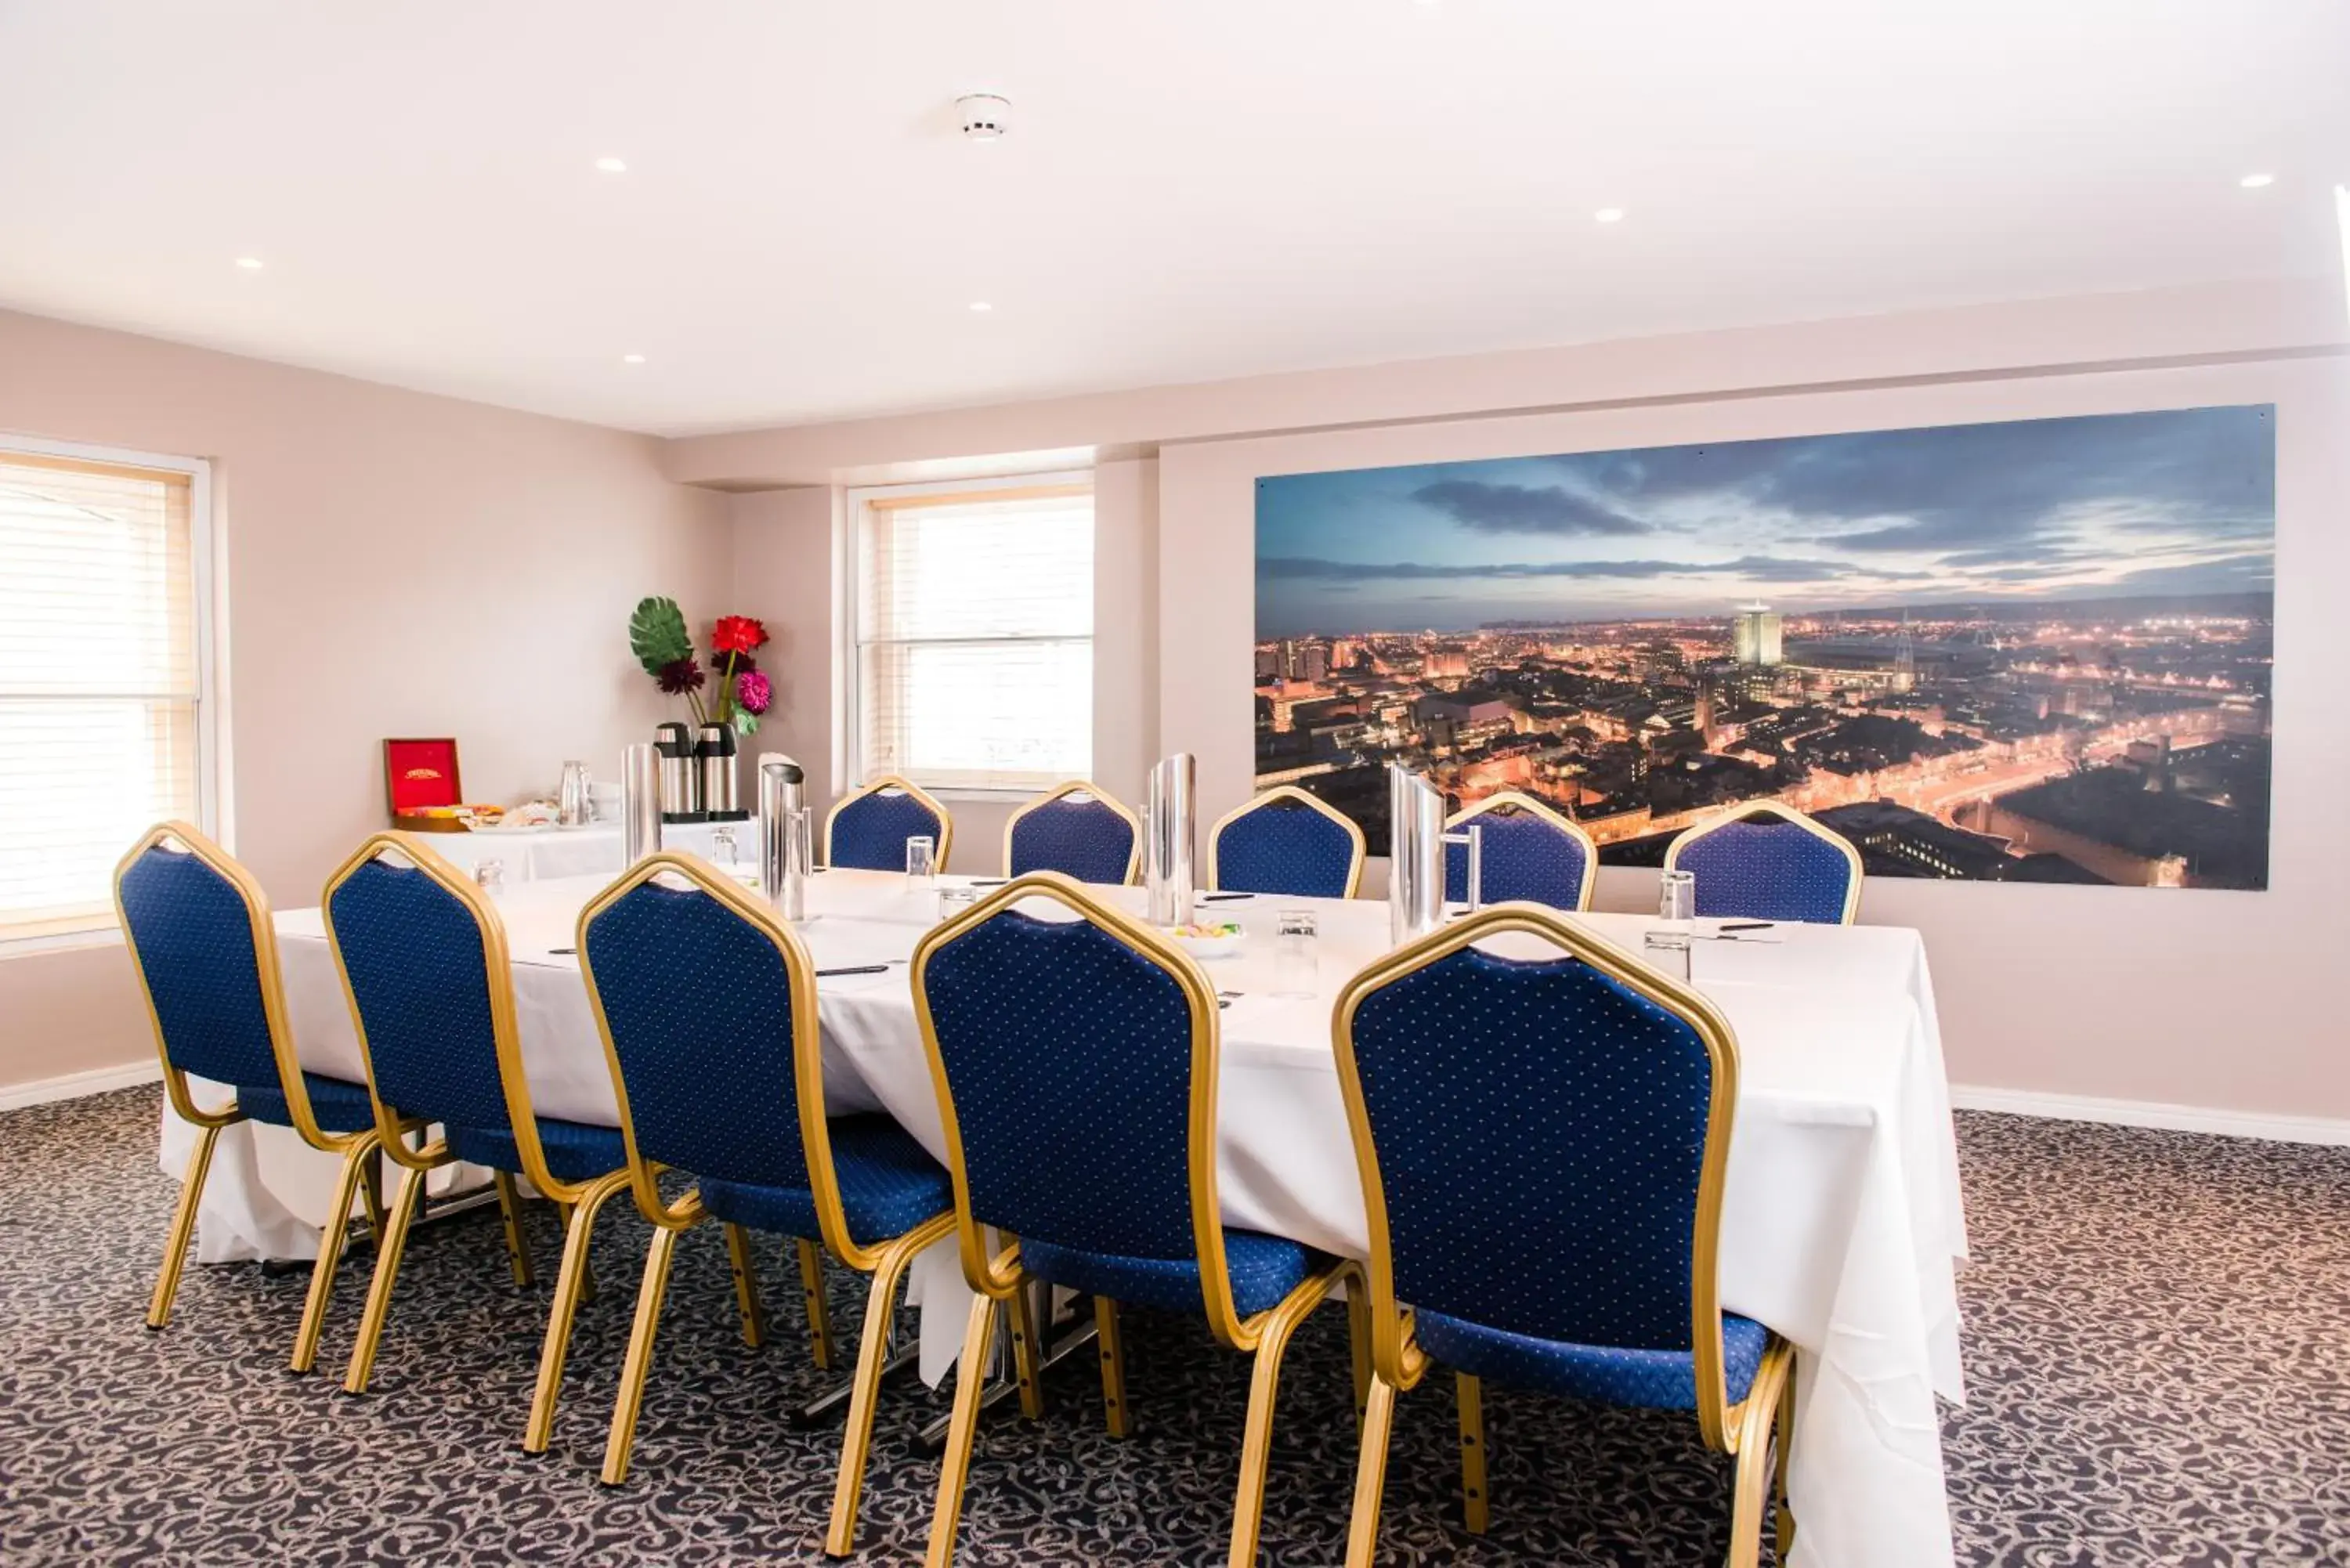 Banquet/Function facilities in The Royal Hotel Cardiff